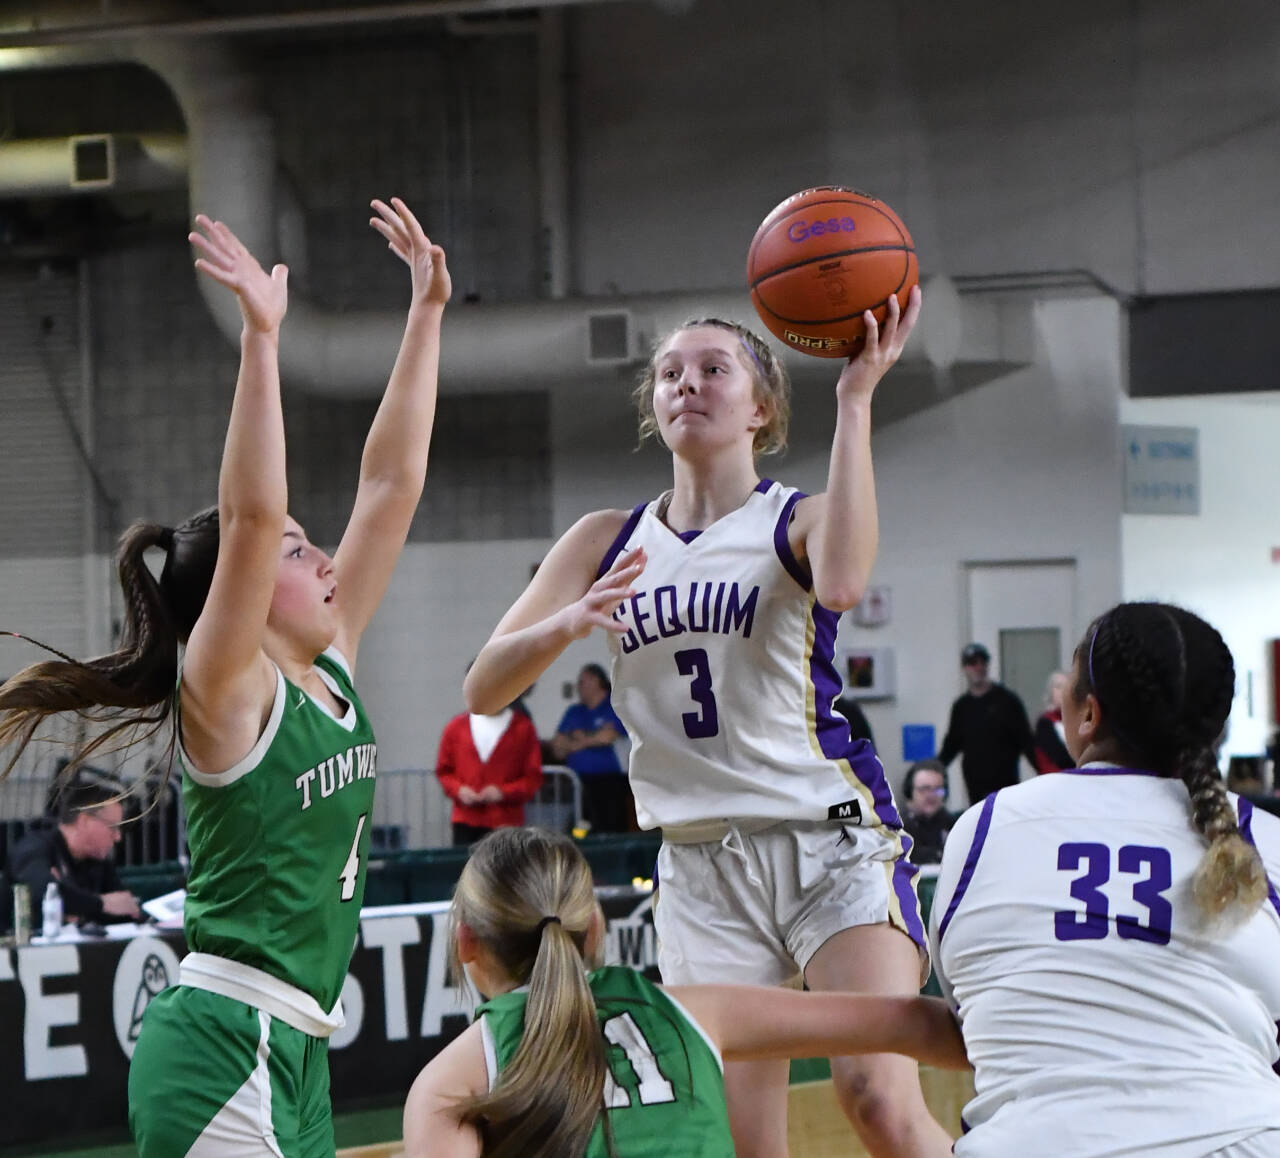 Photo by Jim Heintz / With teammate Jelissa Julmist (33) looking on, Sequim’s Jolene Vaara rises up for a shot in the Wolves’ 38-24 win over Tumwater at the class 2A state tournament in March.